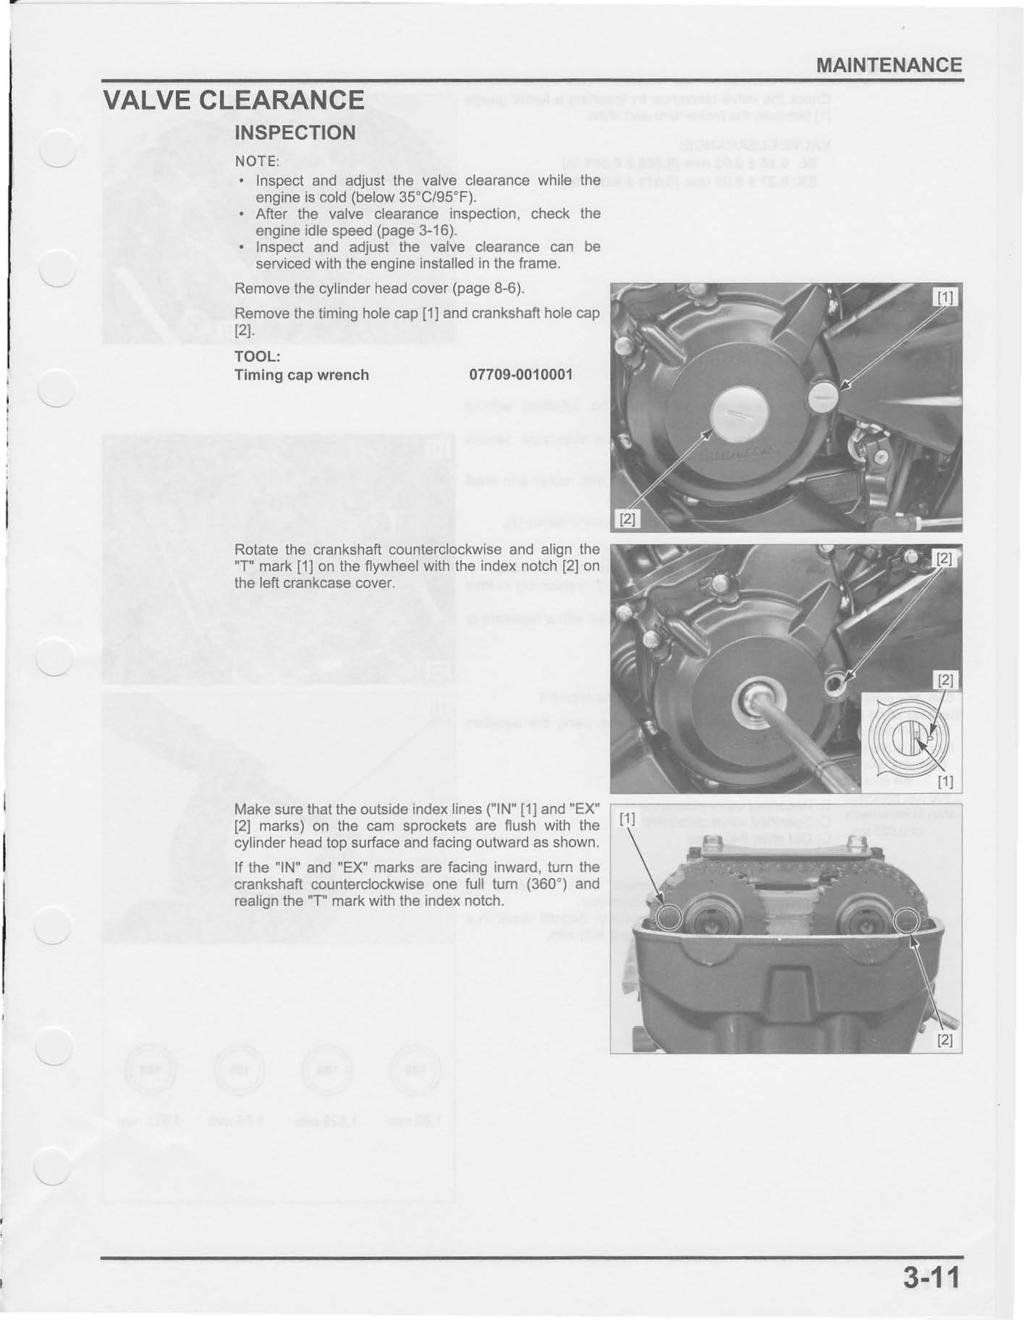 VALVE CLEARANCE INSPECTION NOT E' Inspect and adjust the valve clearance while the engine is cold {below 35 C/95 F). After the valve clearance inspection, check the engine idle speed (page 3-16).